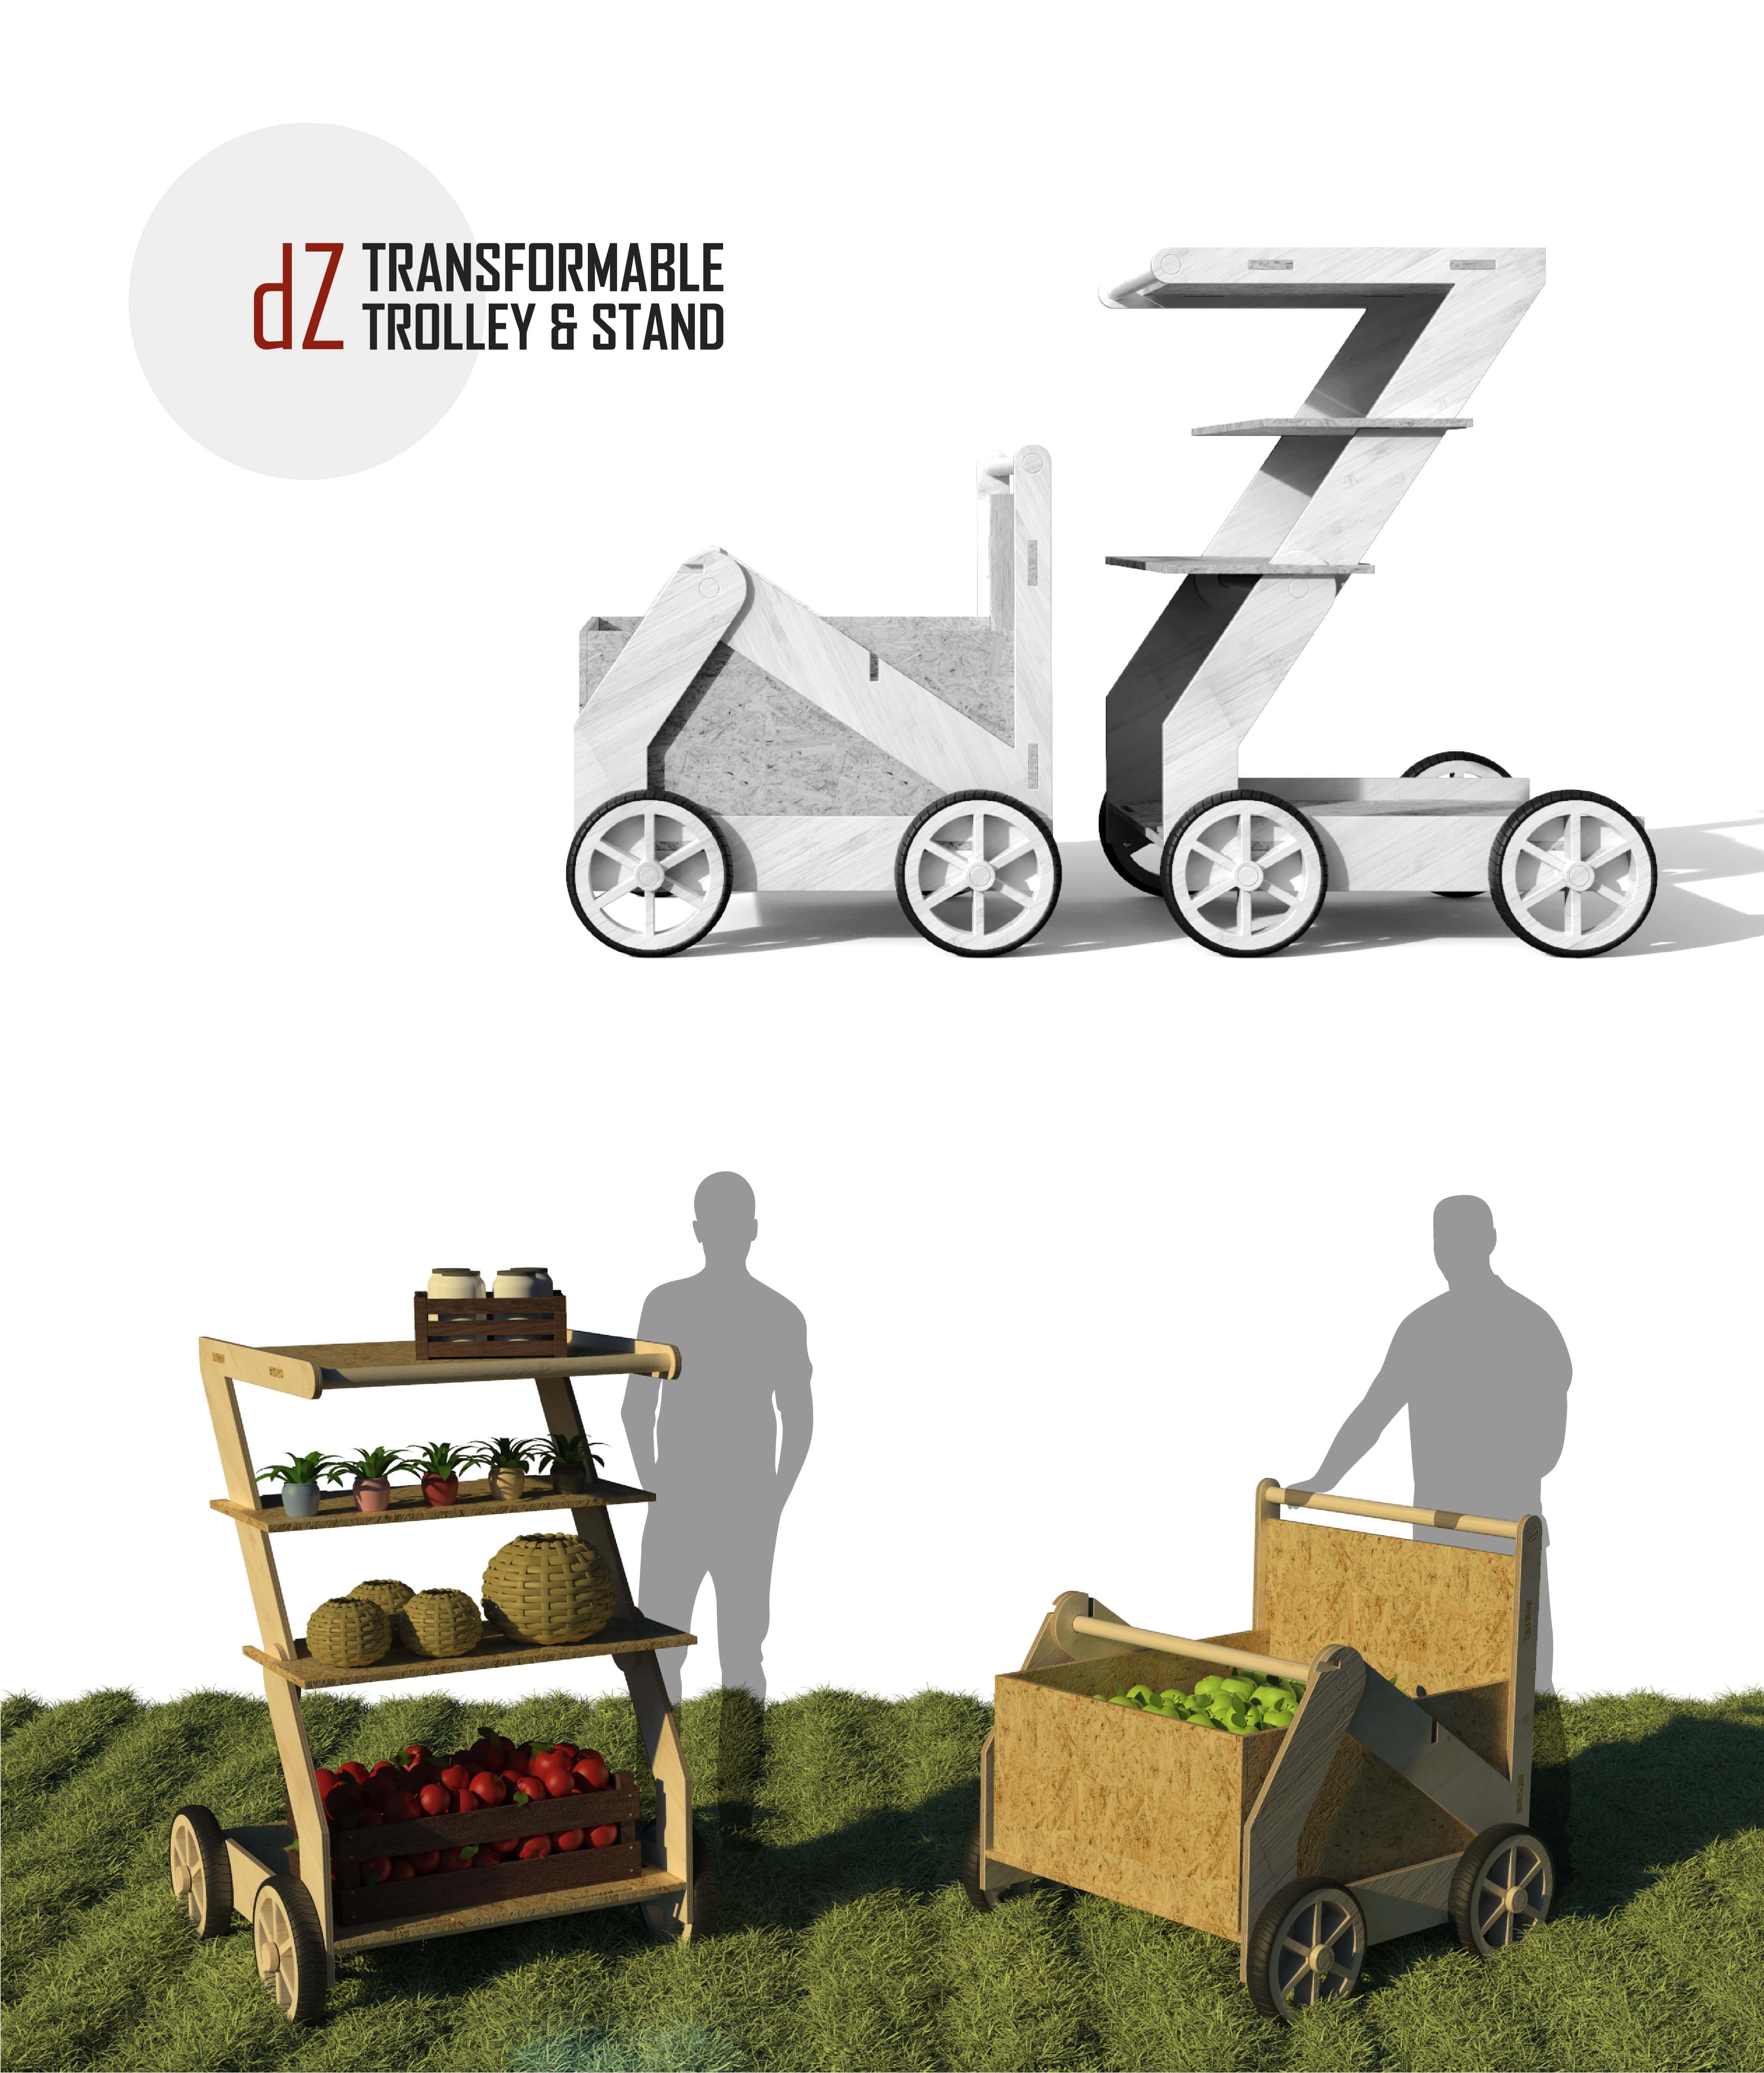 dZ - Transformable Trolley & Stand for an Ecovillage by Kerem İnak - Creative Work